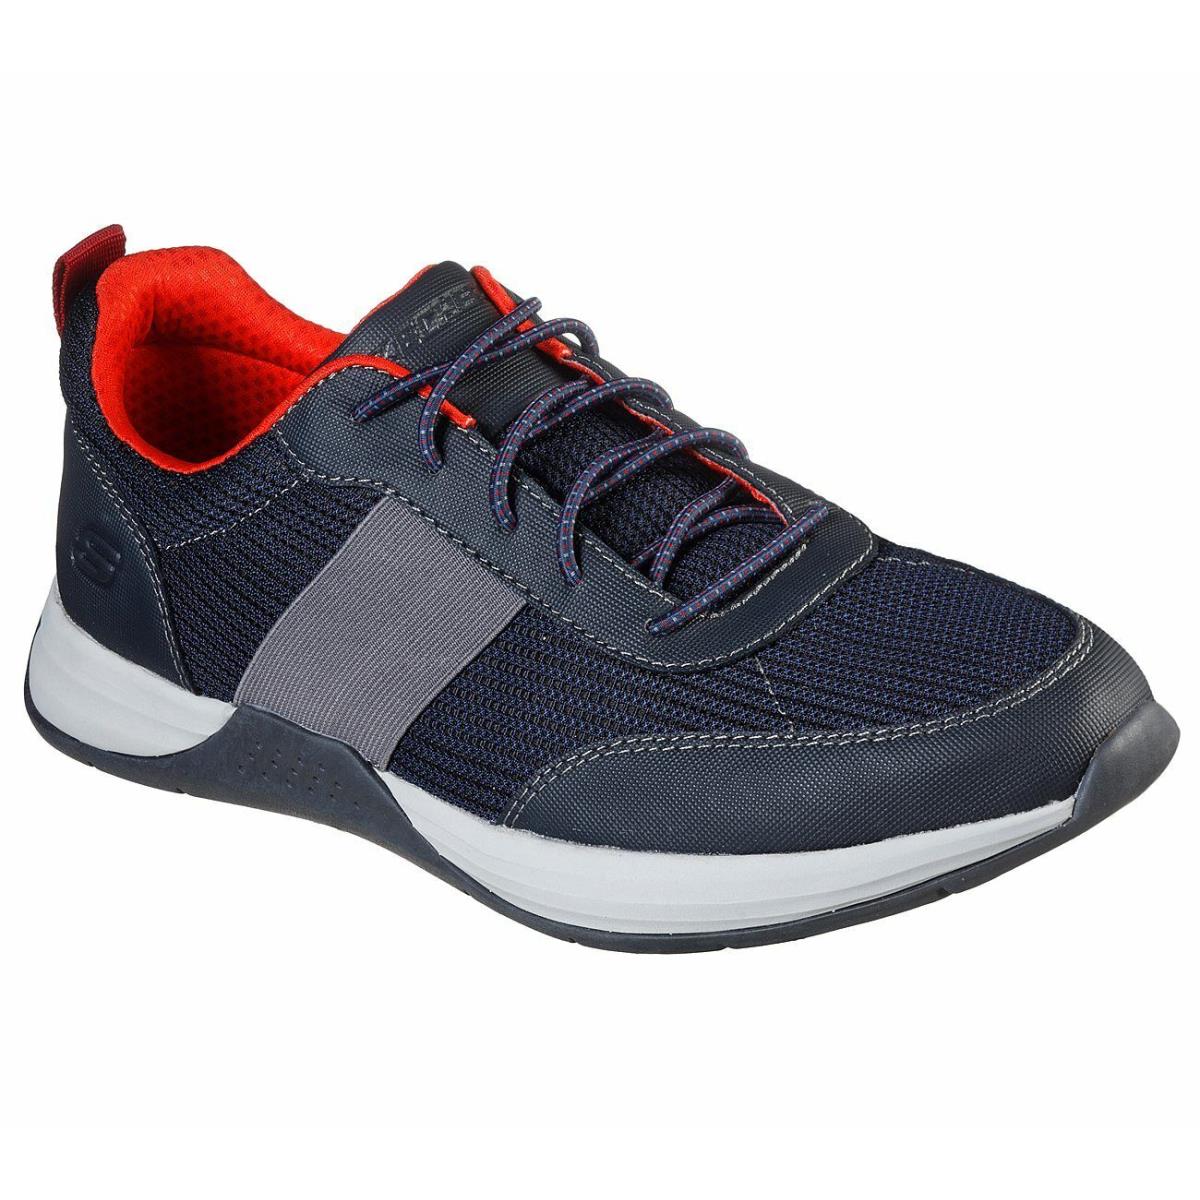 Men`s Skechers Evano Neslo Sporty Casual Shoes 210038 /nvy Multiple Sizes Navy - Navy